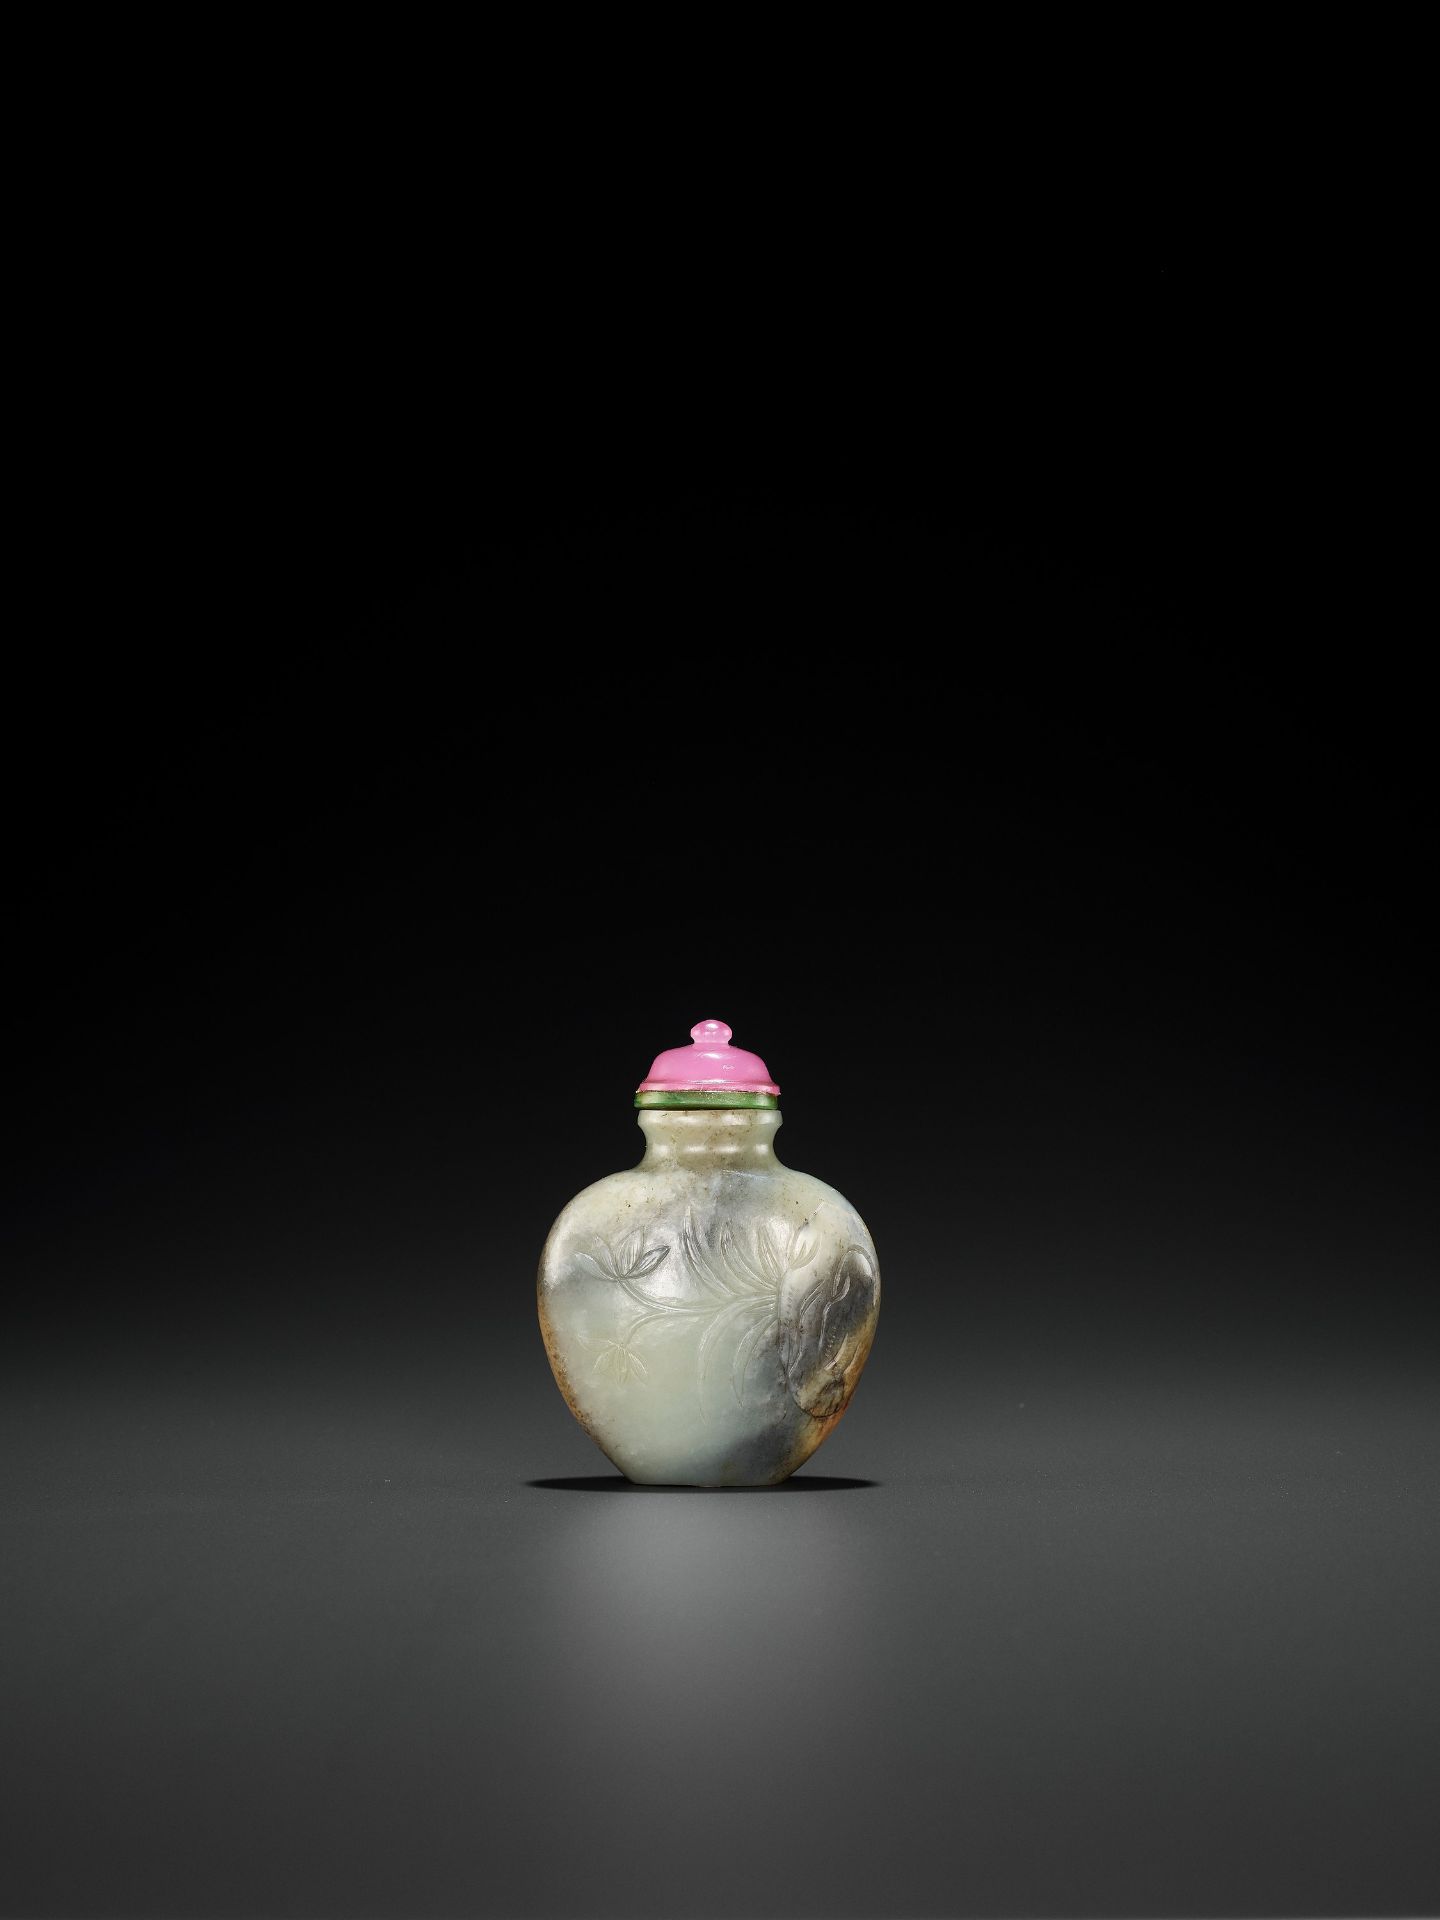 AN INSCRIBED WHITE, GRAY AND RUSSET JADEITE 'TIGER' SNUFF BOTTLE, SIGNATURE OF WANG HENG (1817-1882) - Image 2 of 8